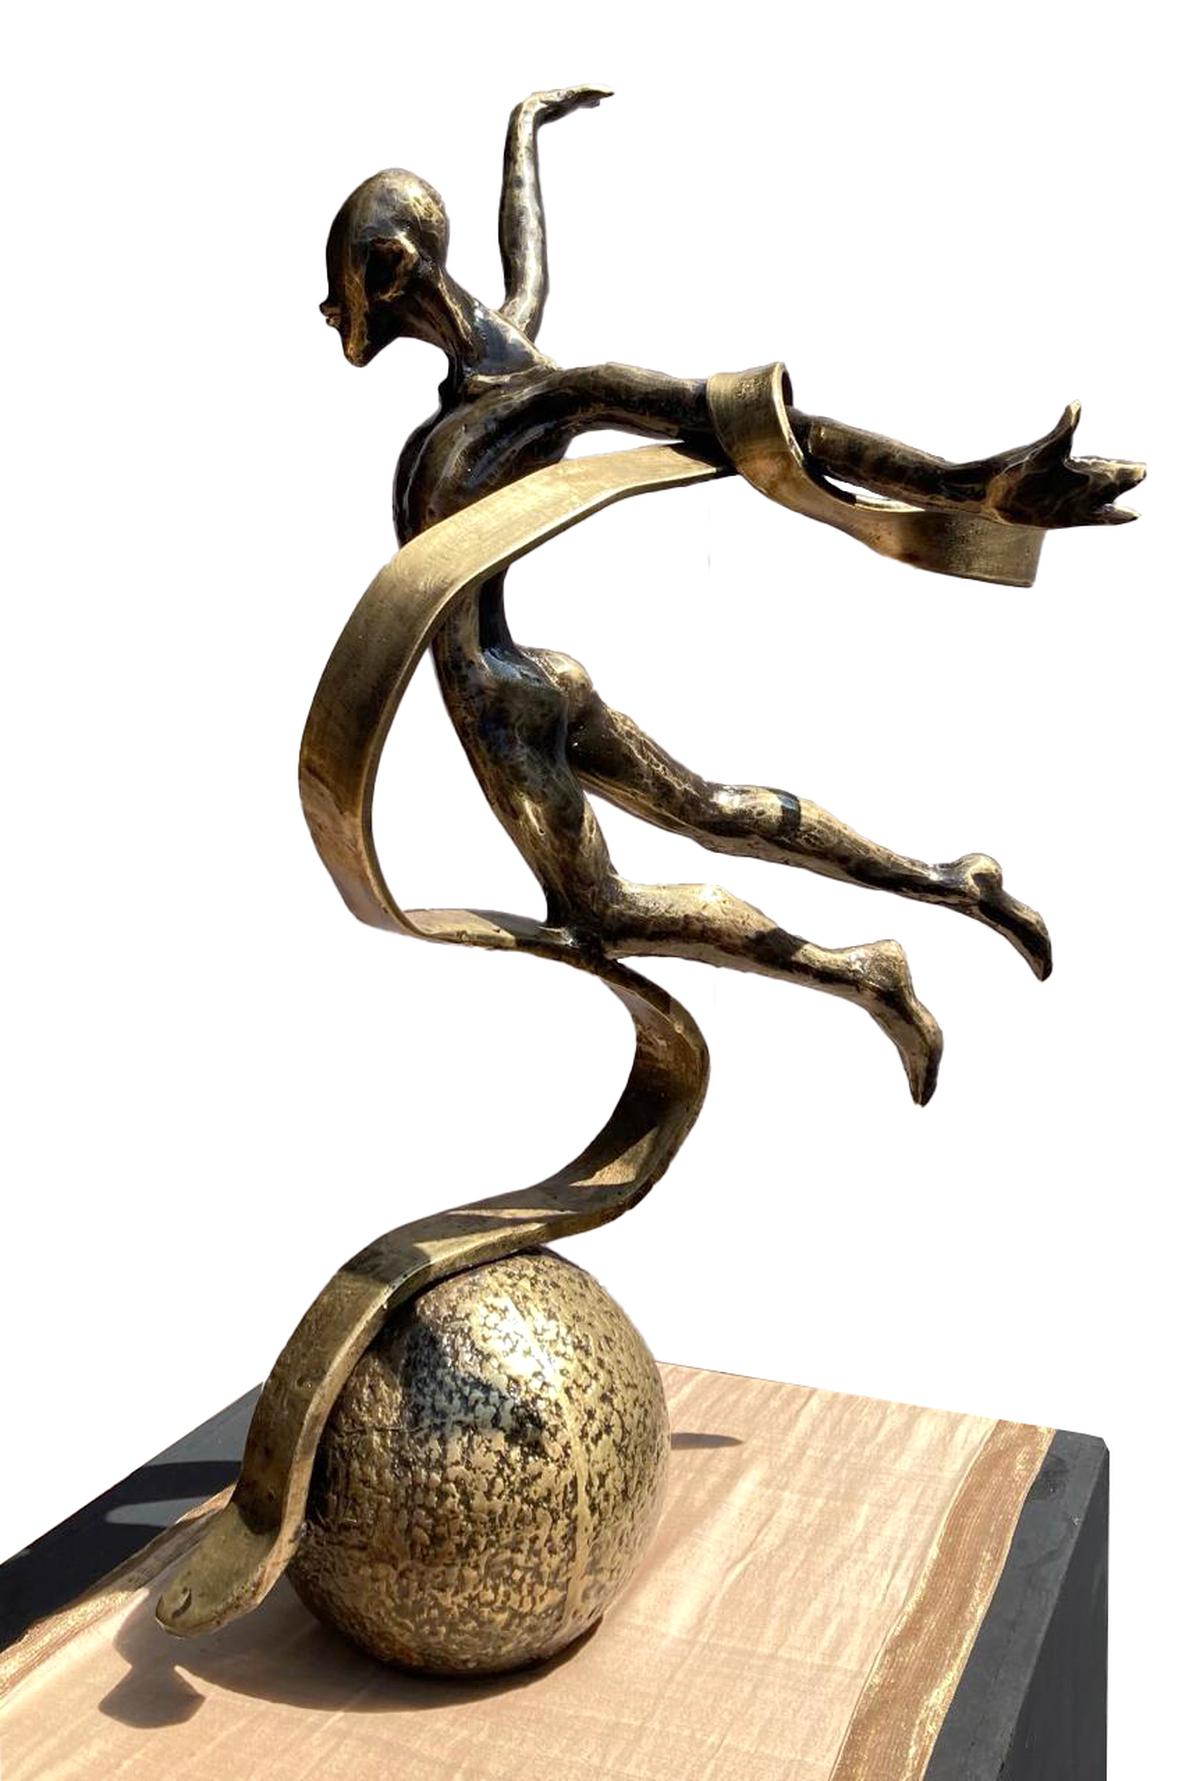 Jump, a bronze sculpture by Dimpy Menon on Show at Gallery Art Positive 